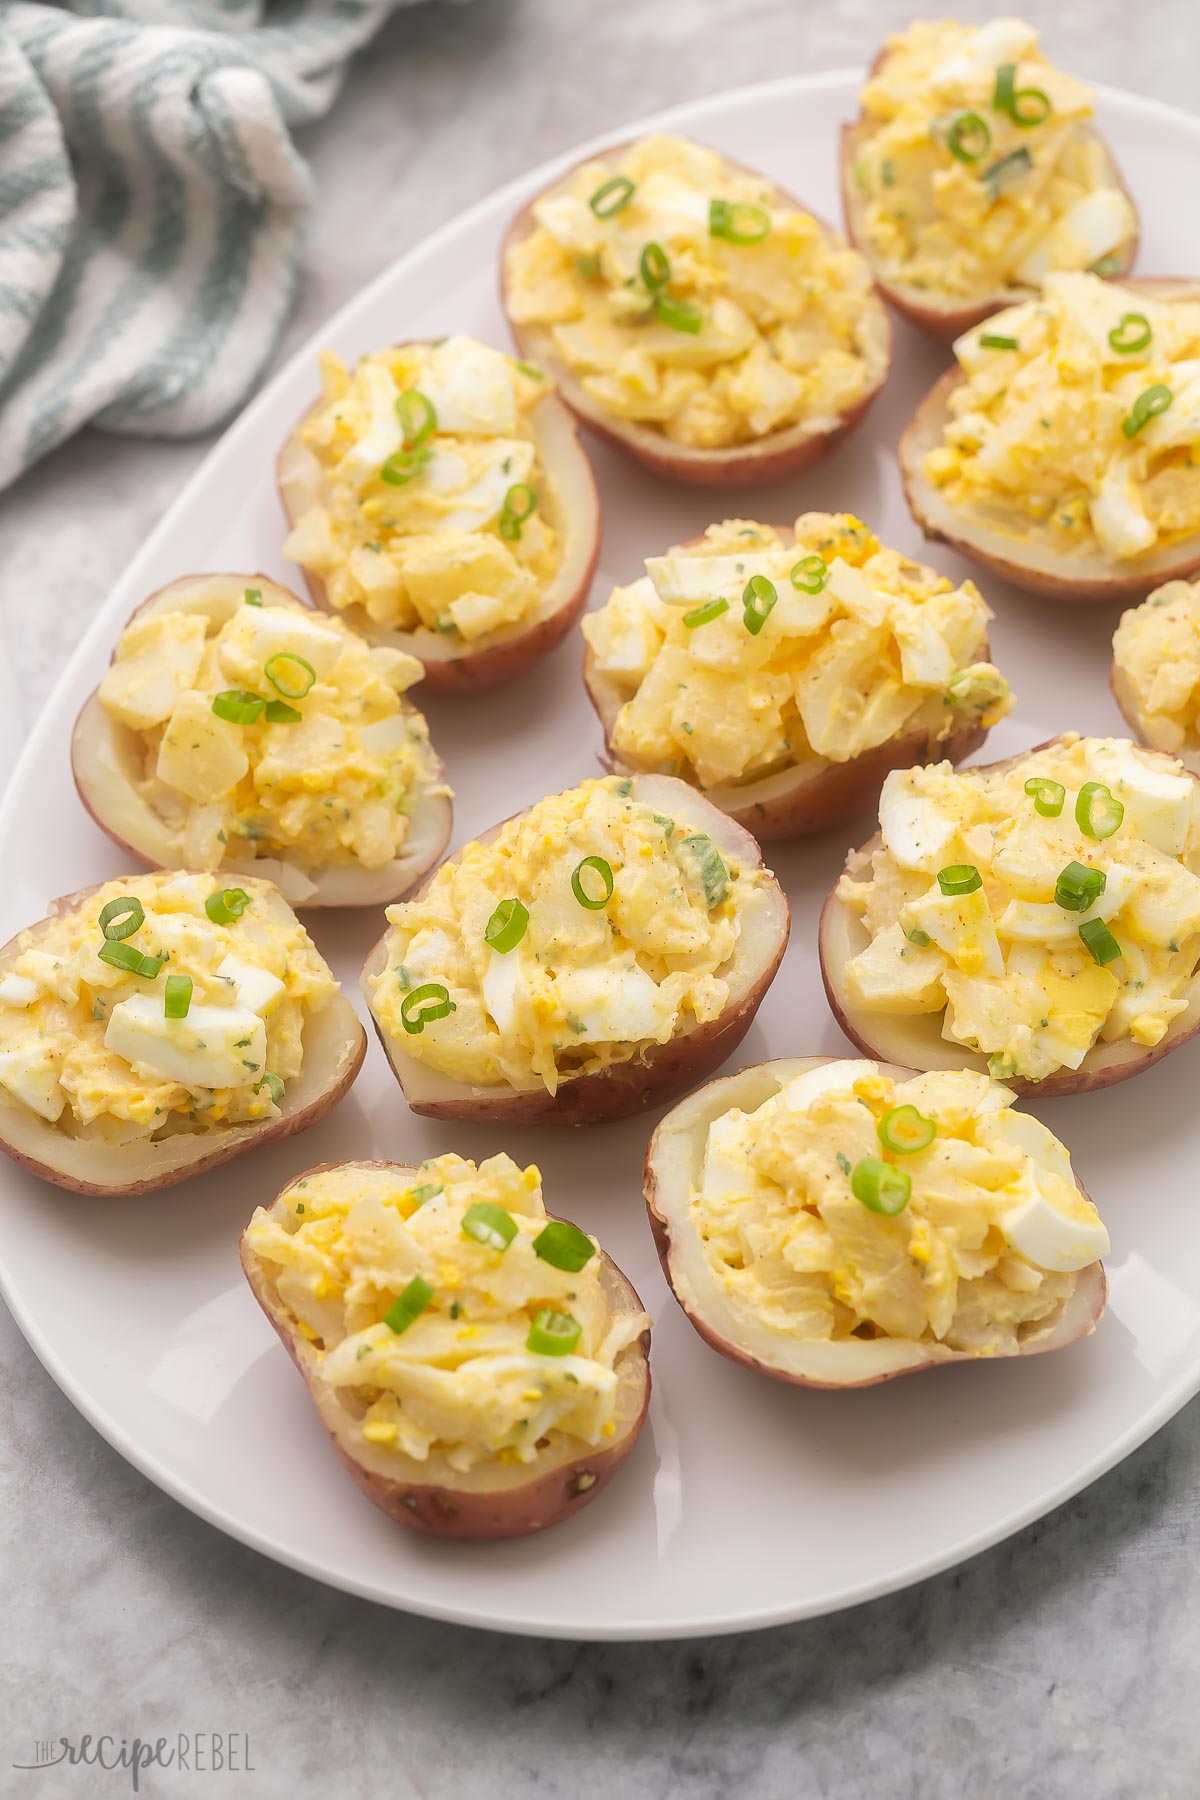 a large plate filled with potato salad bites garnished with green onions.